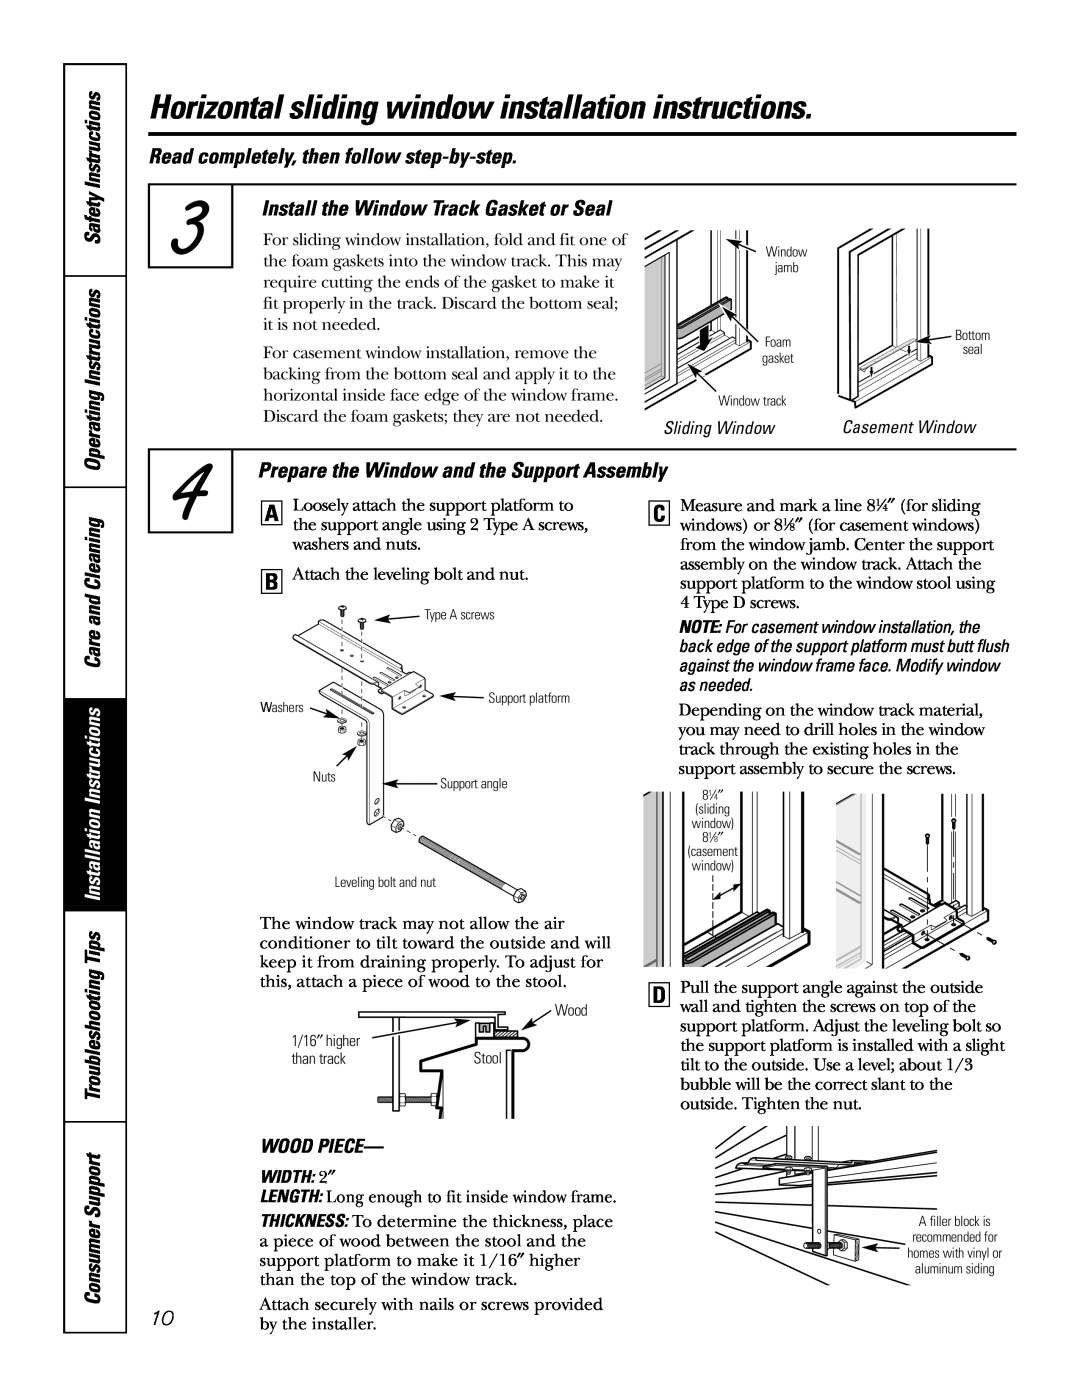 GE AGX08, AGX10 Install the Window Track Gasket or Seal, Installation Instructions Care and Cleaning, Consumer Support 